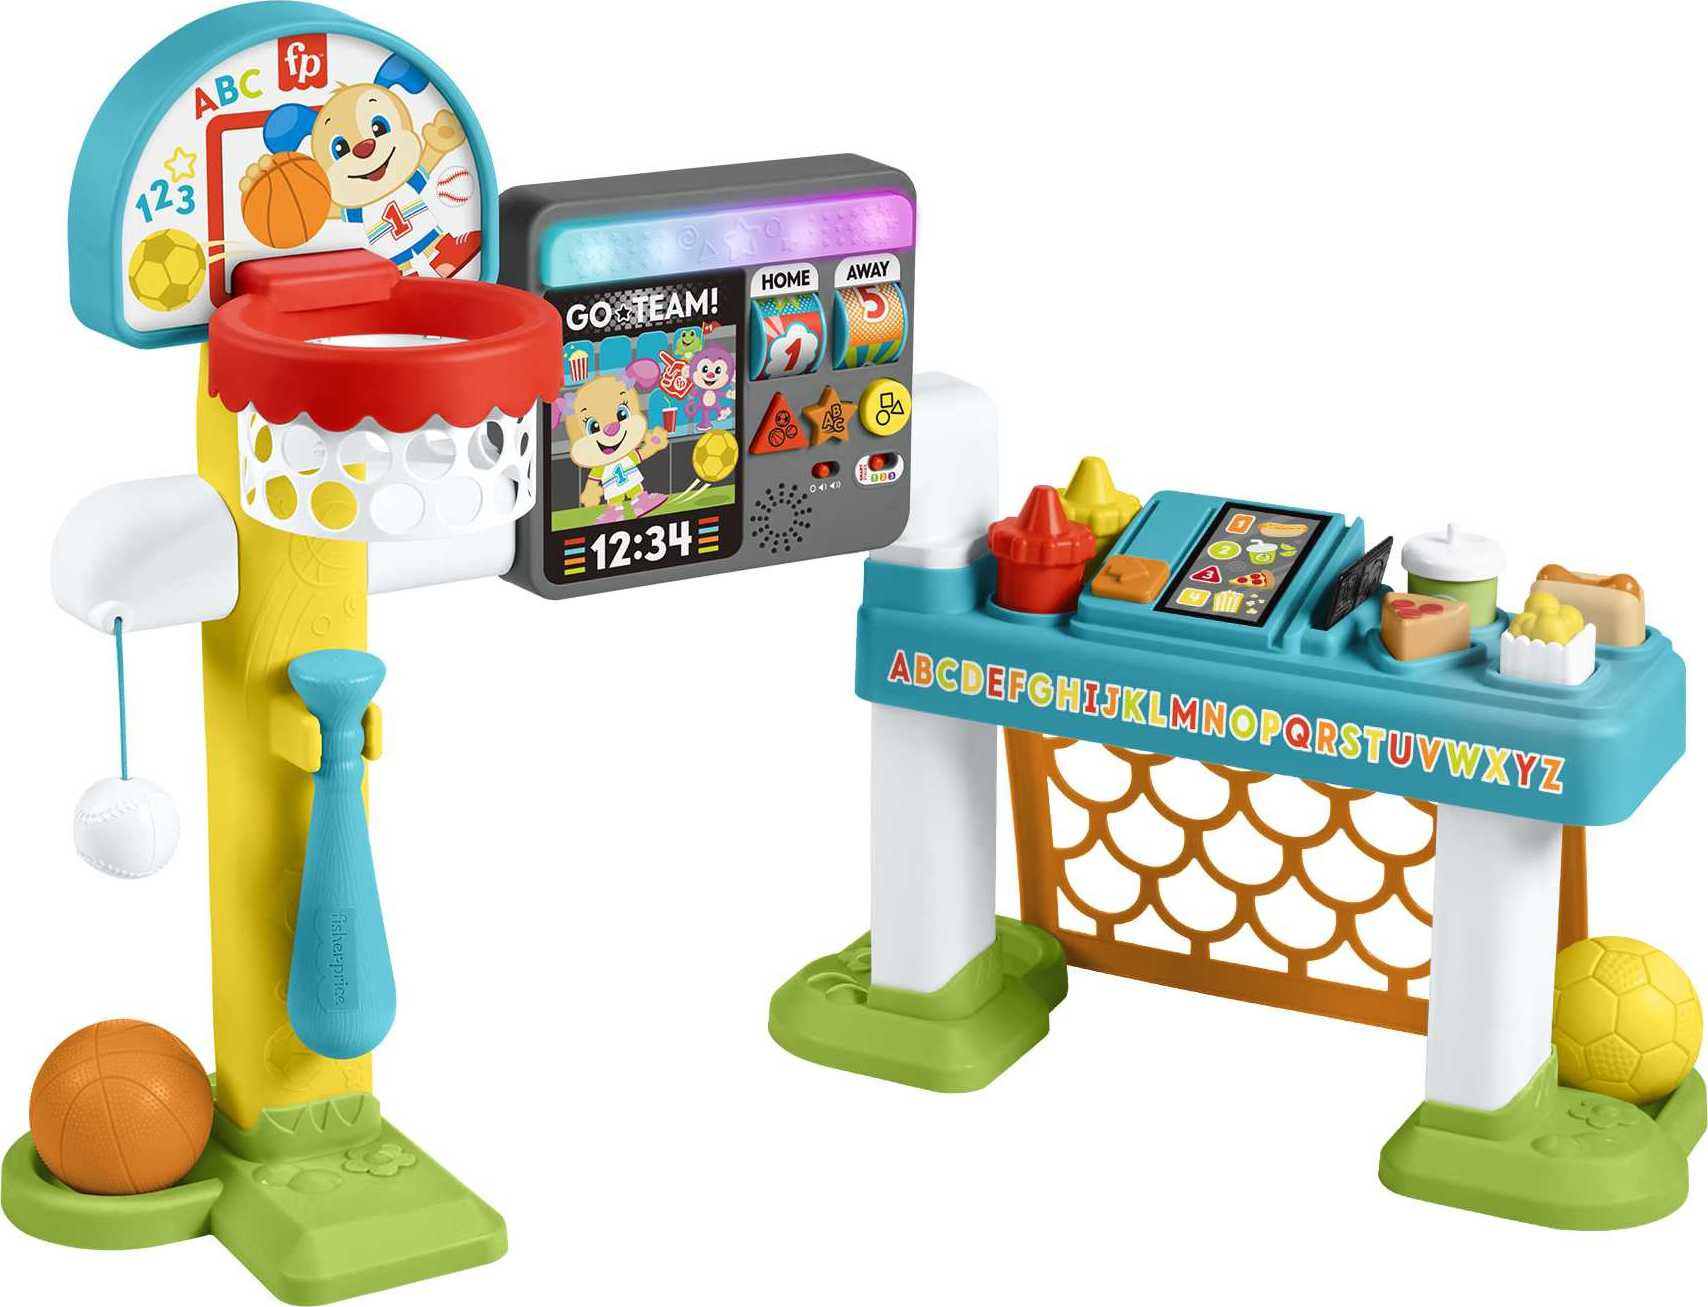 Fisher-Price Laugh & Learn 4-in-1 Game Experience Sports Activity Center & Toddler Learning Toy - image 1 of 7